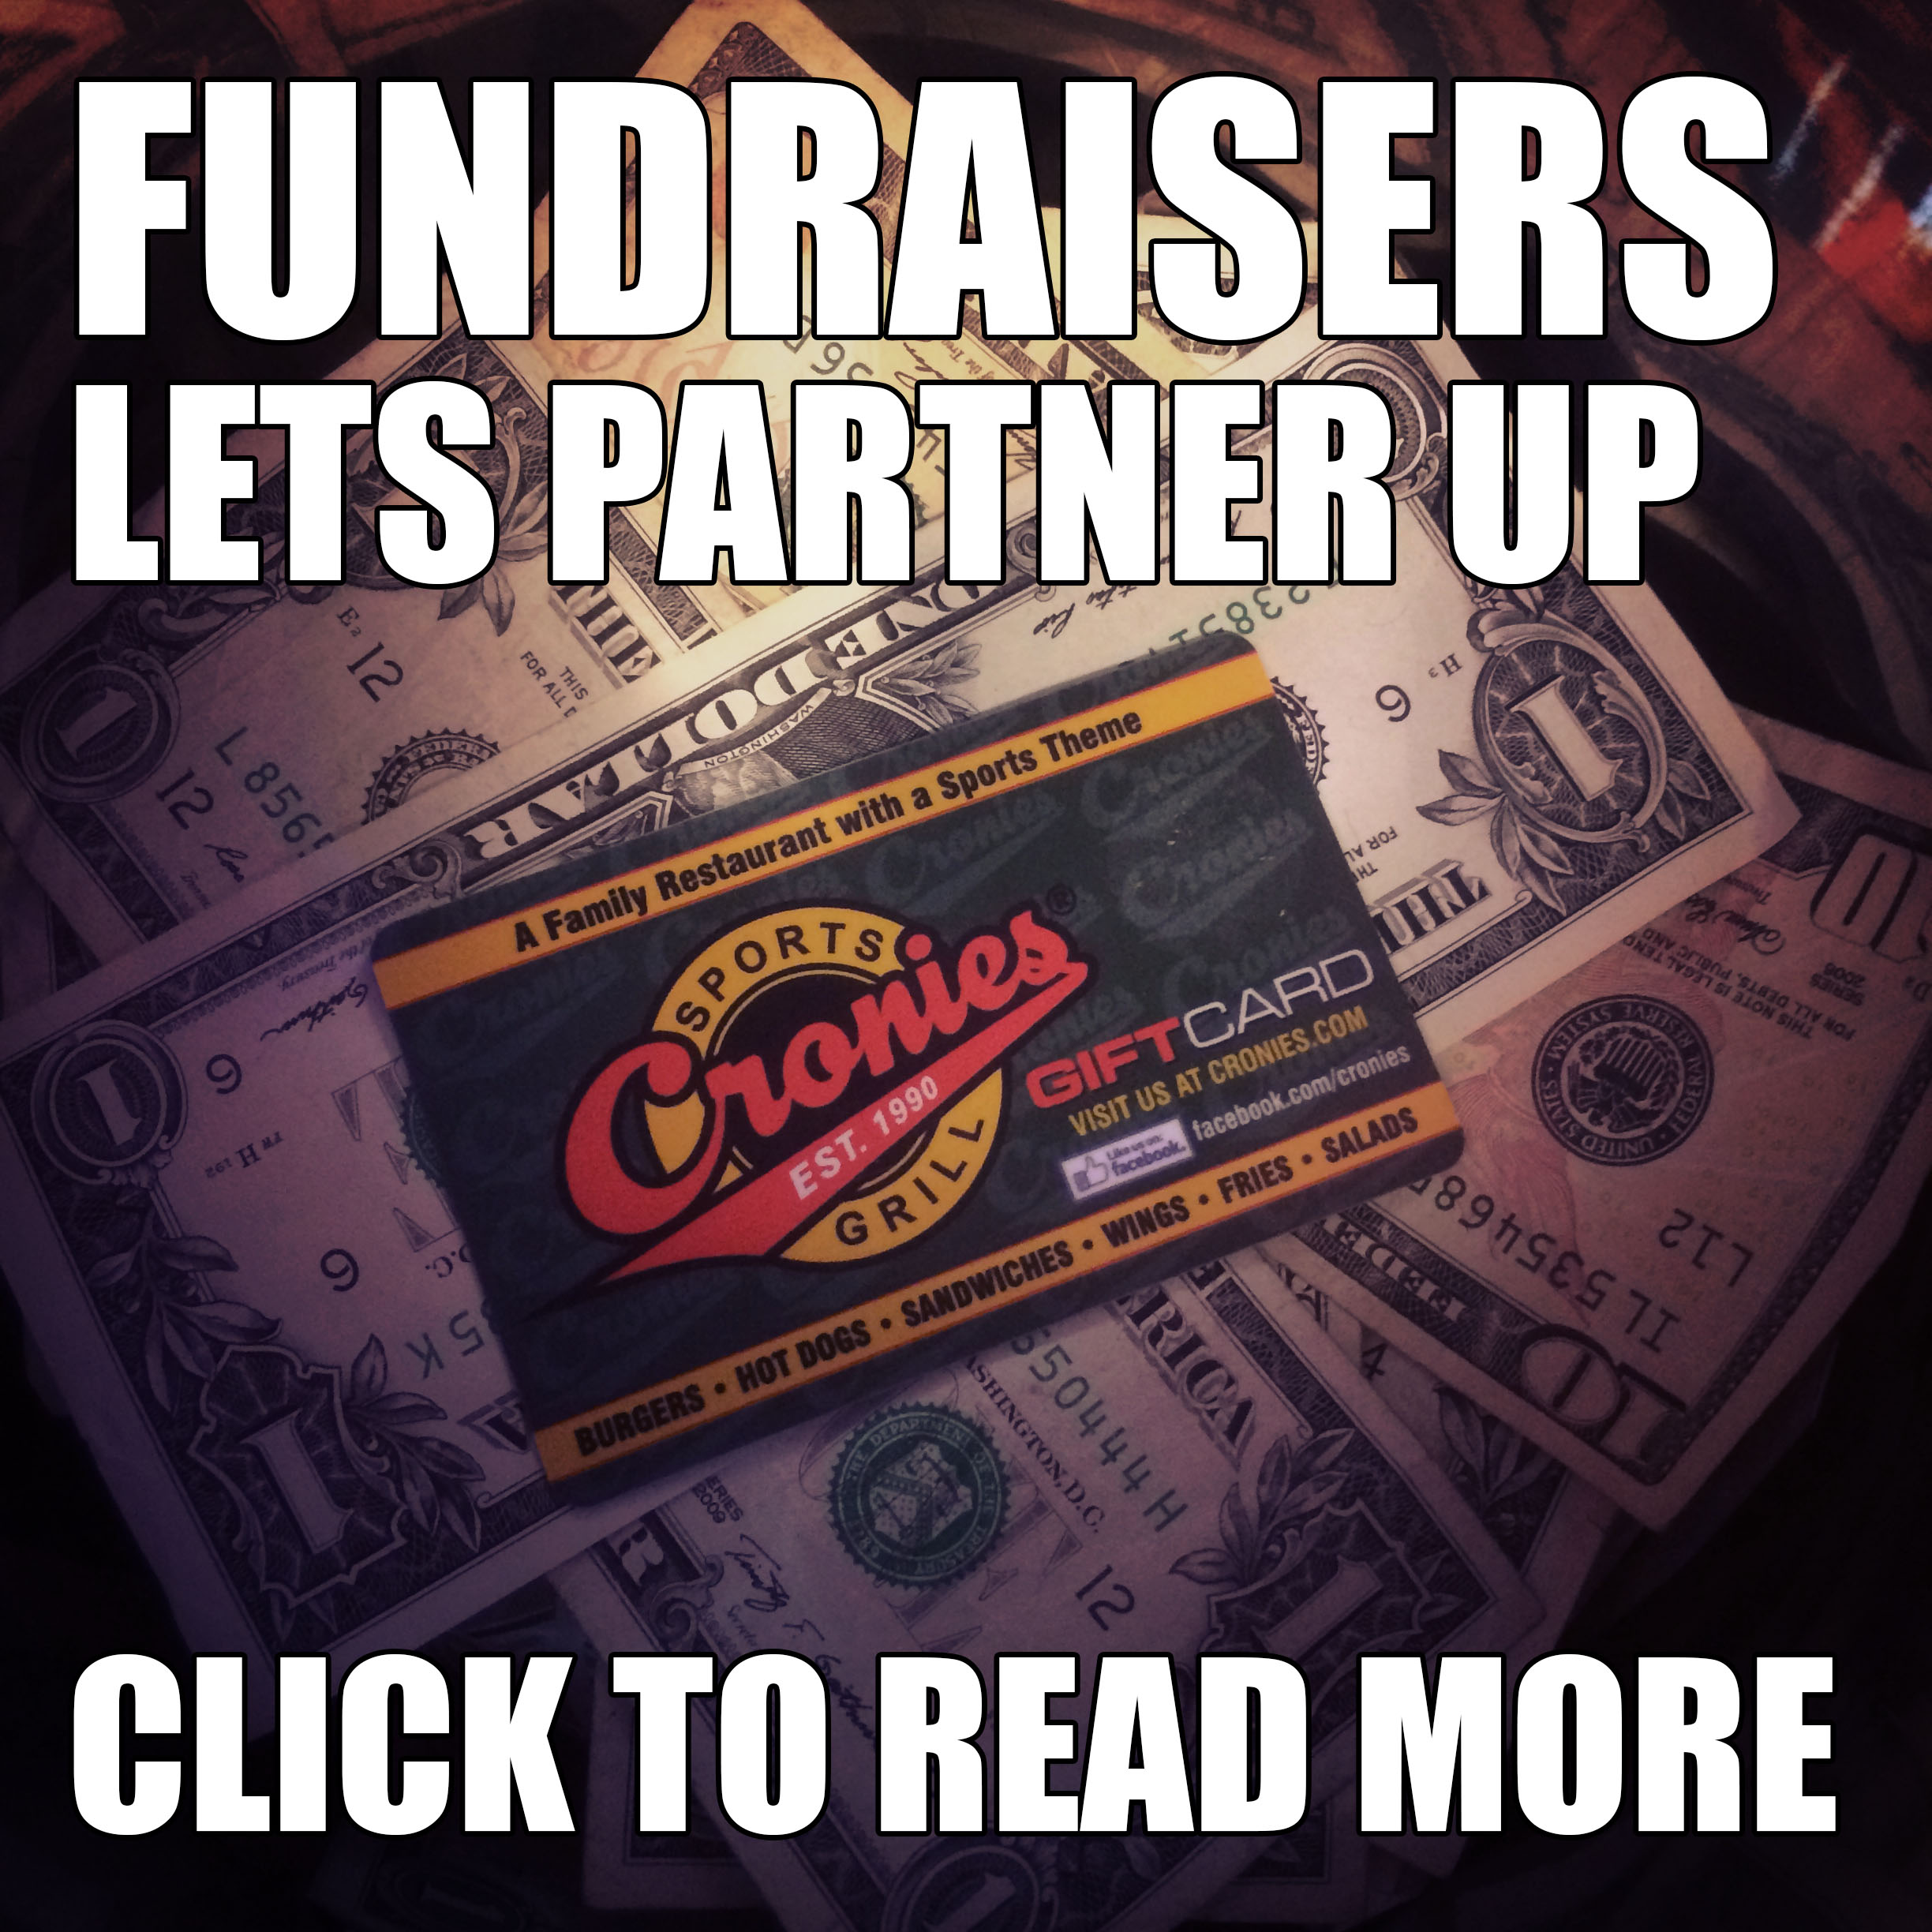 Fundraisers Lets Partner Up, Click to Read More